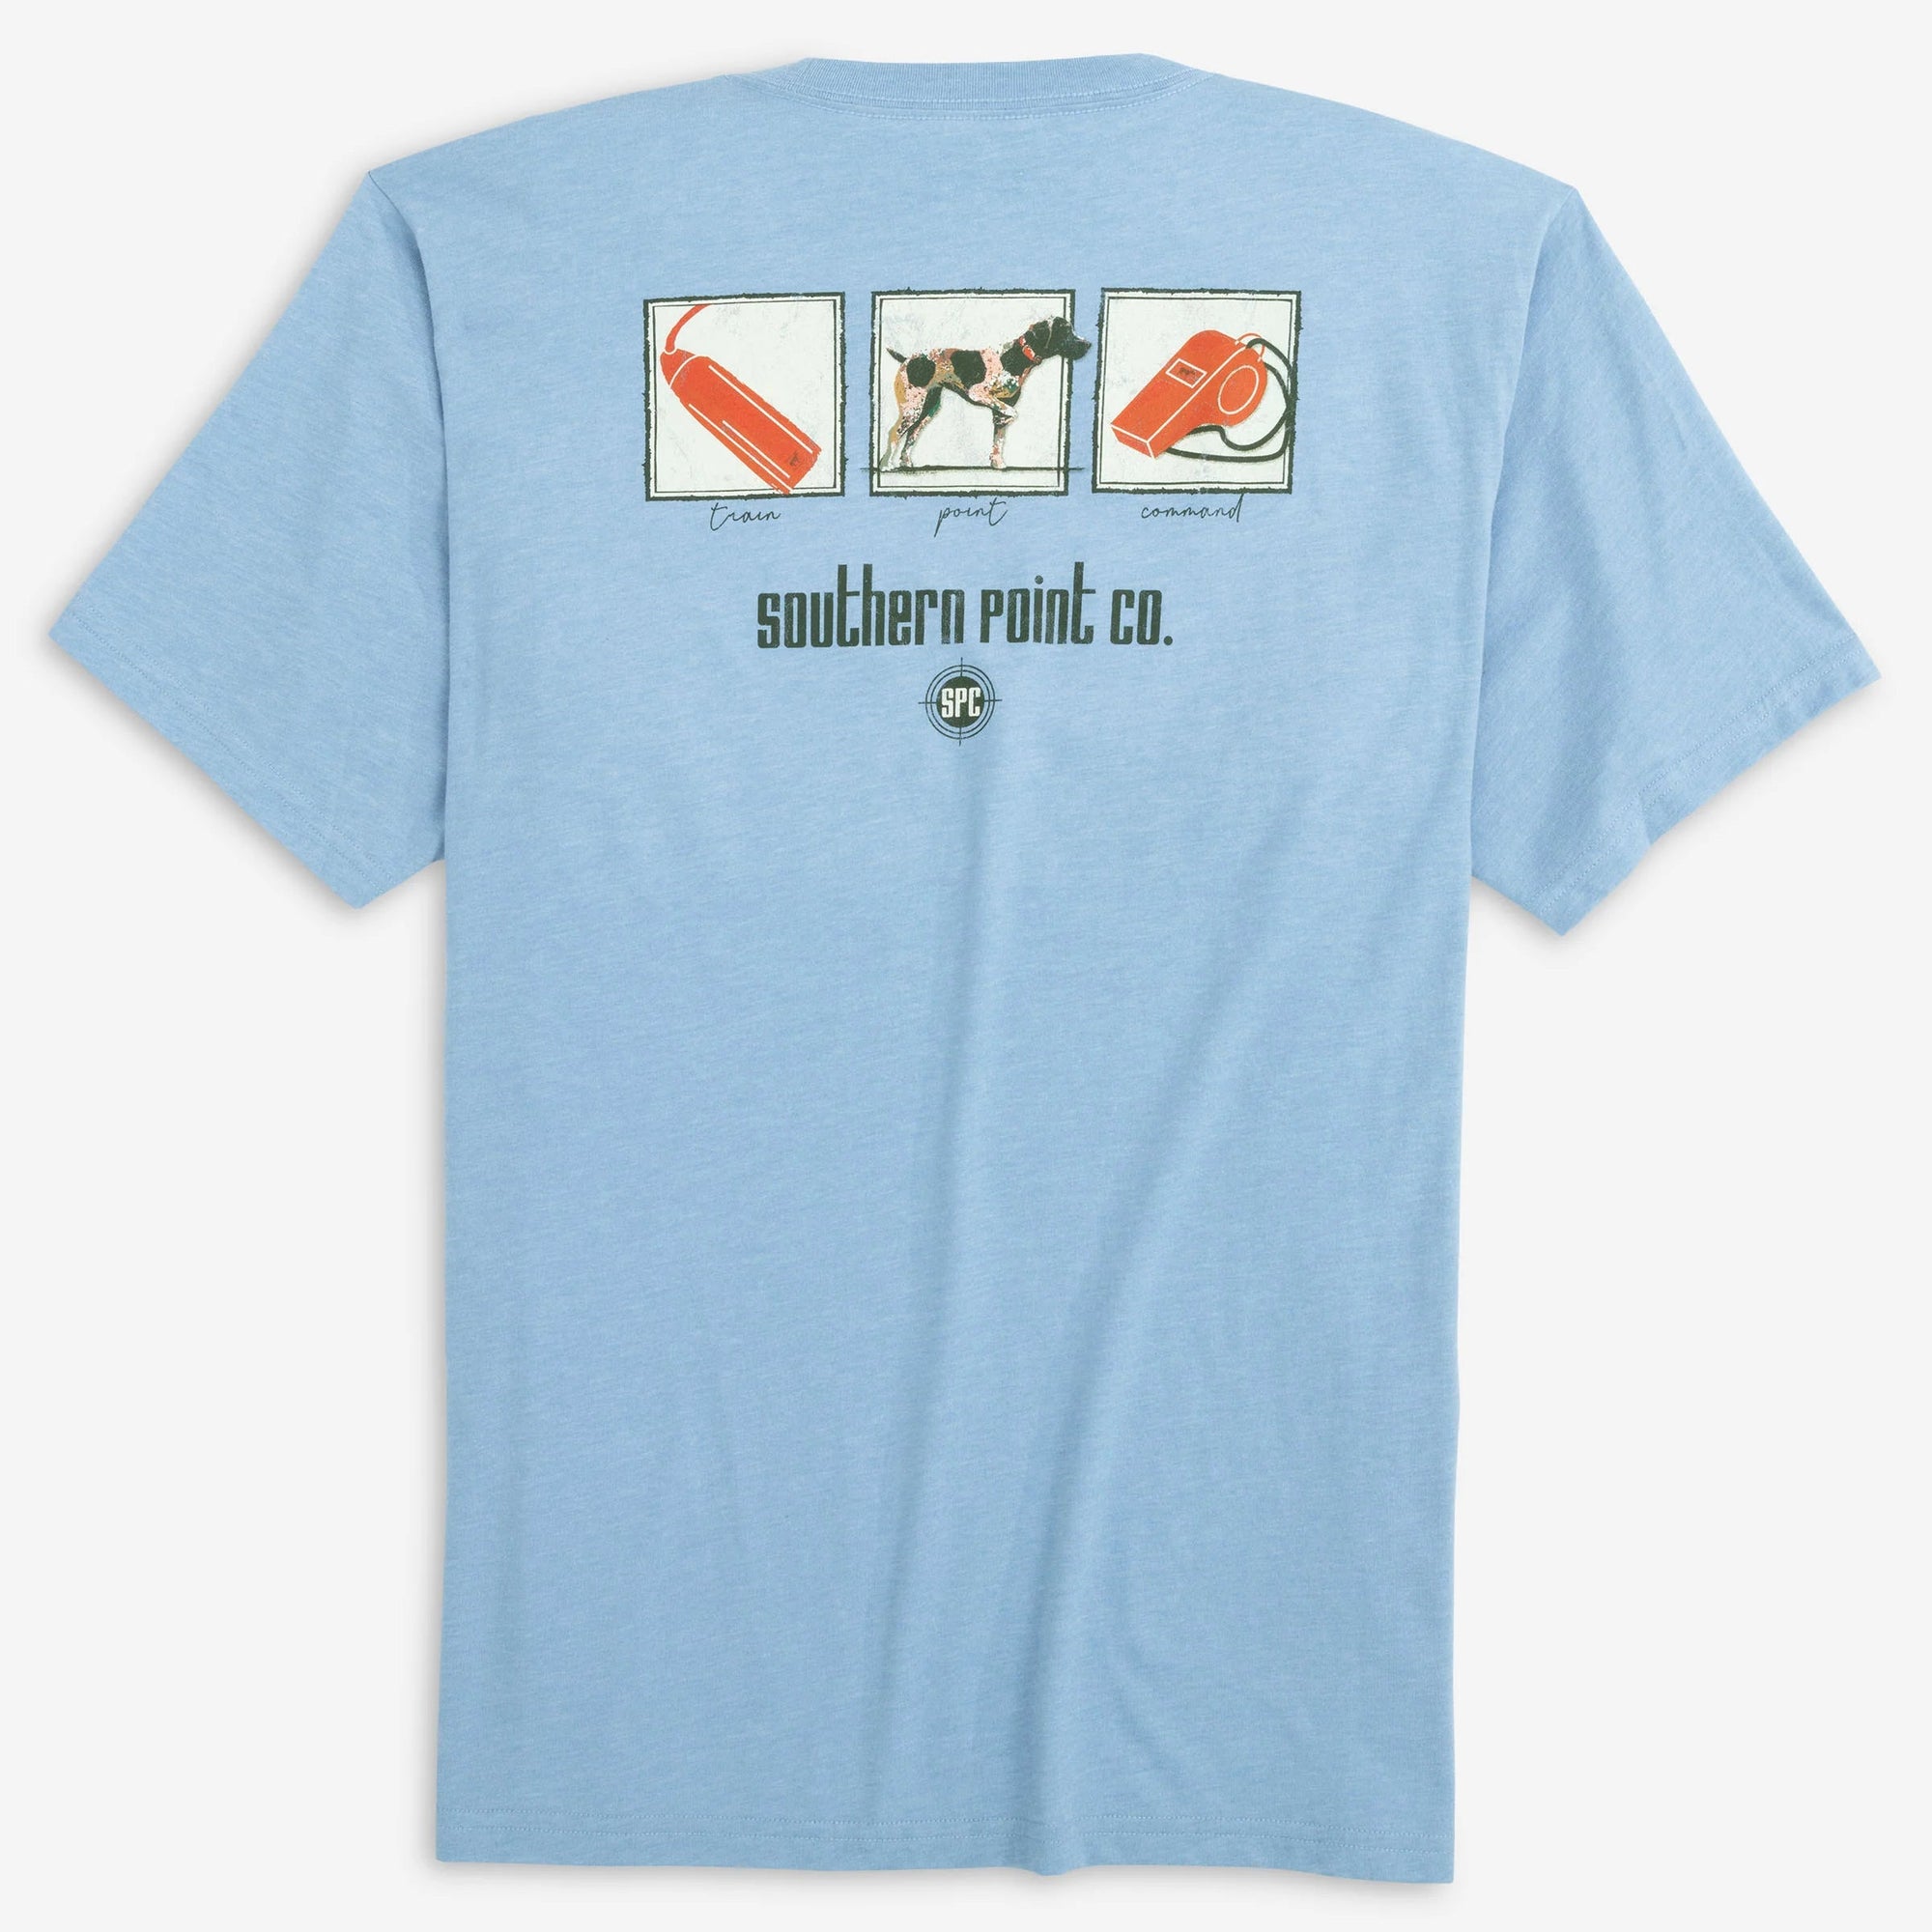 Southern Point Co. Men's Tees Southern Point Train, Point, Command Short Sleeve || David's Clothing